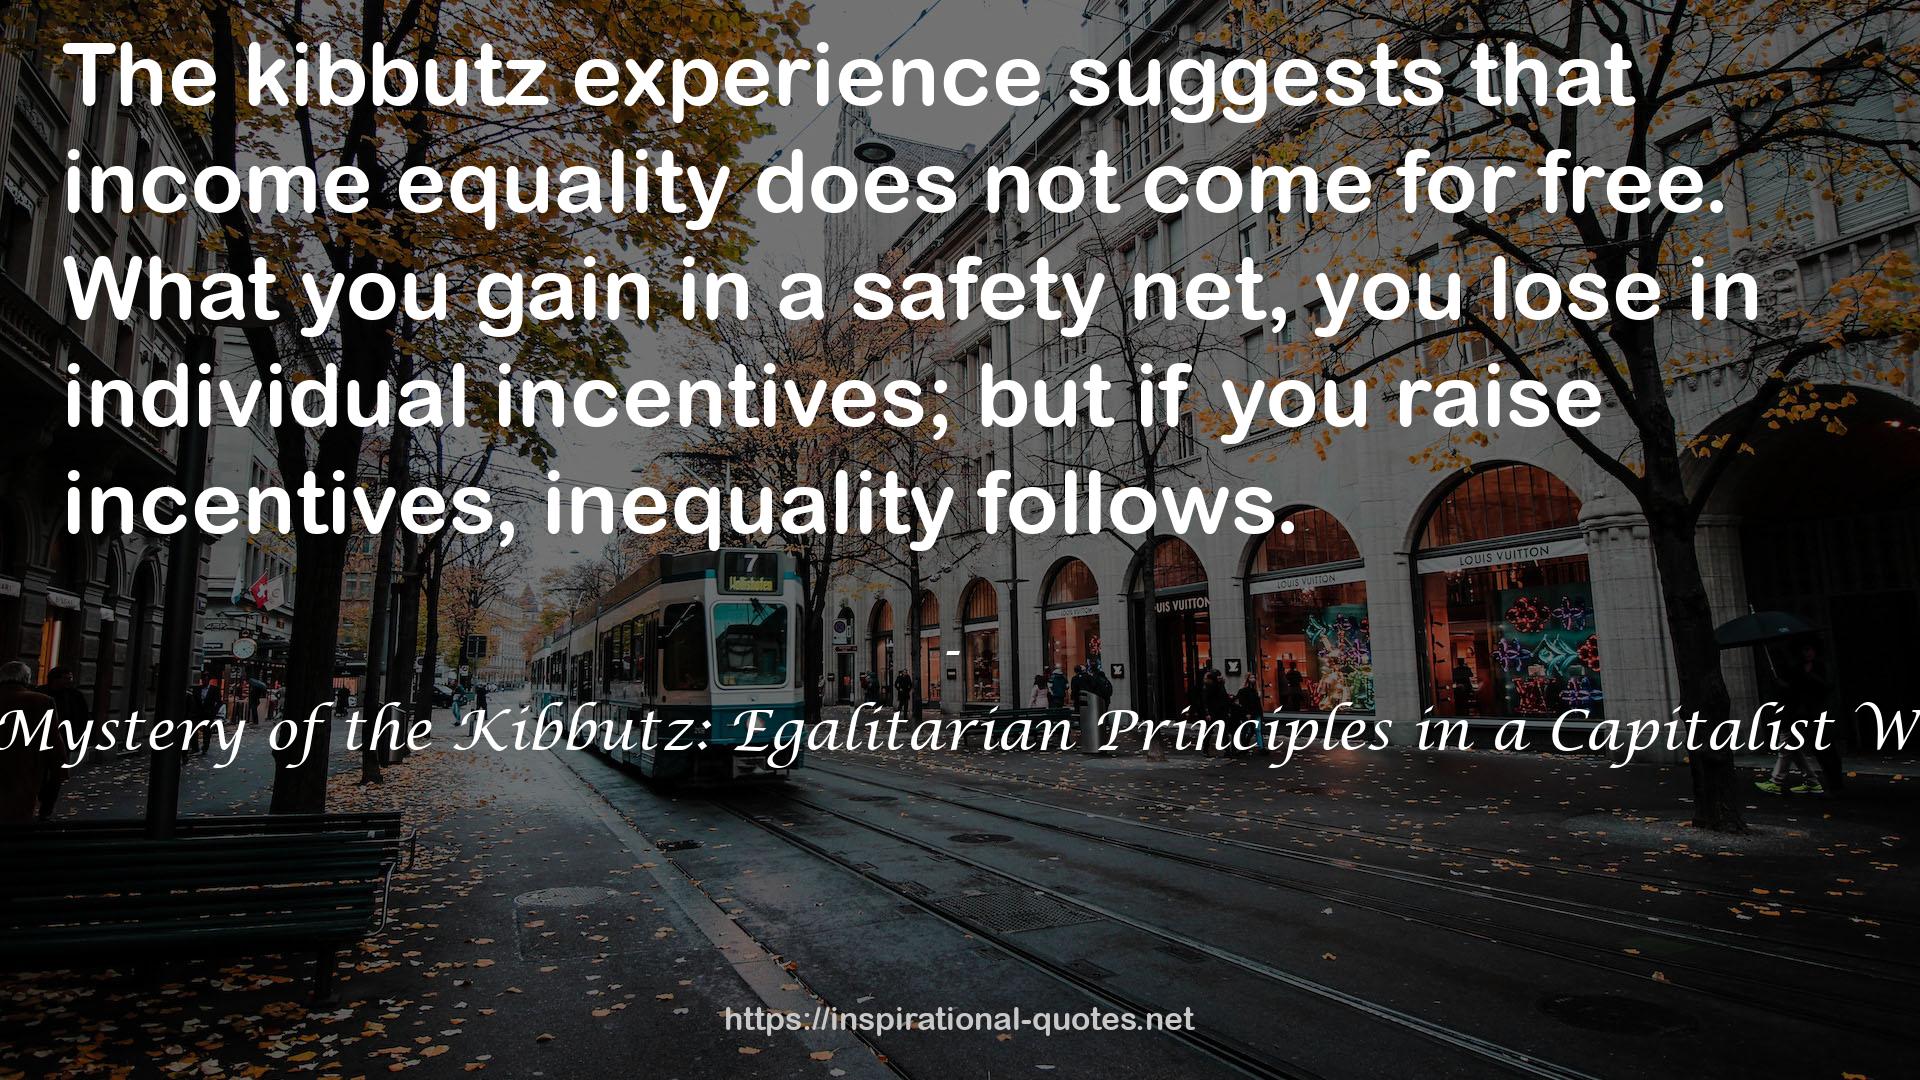 The Mystery of the Kibbutz: Egalitarian Principles in a Capitalist World QUOTES